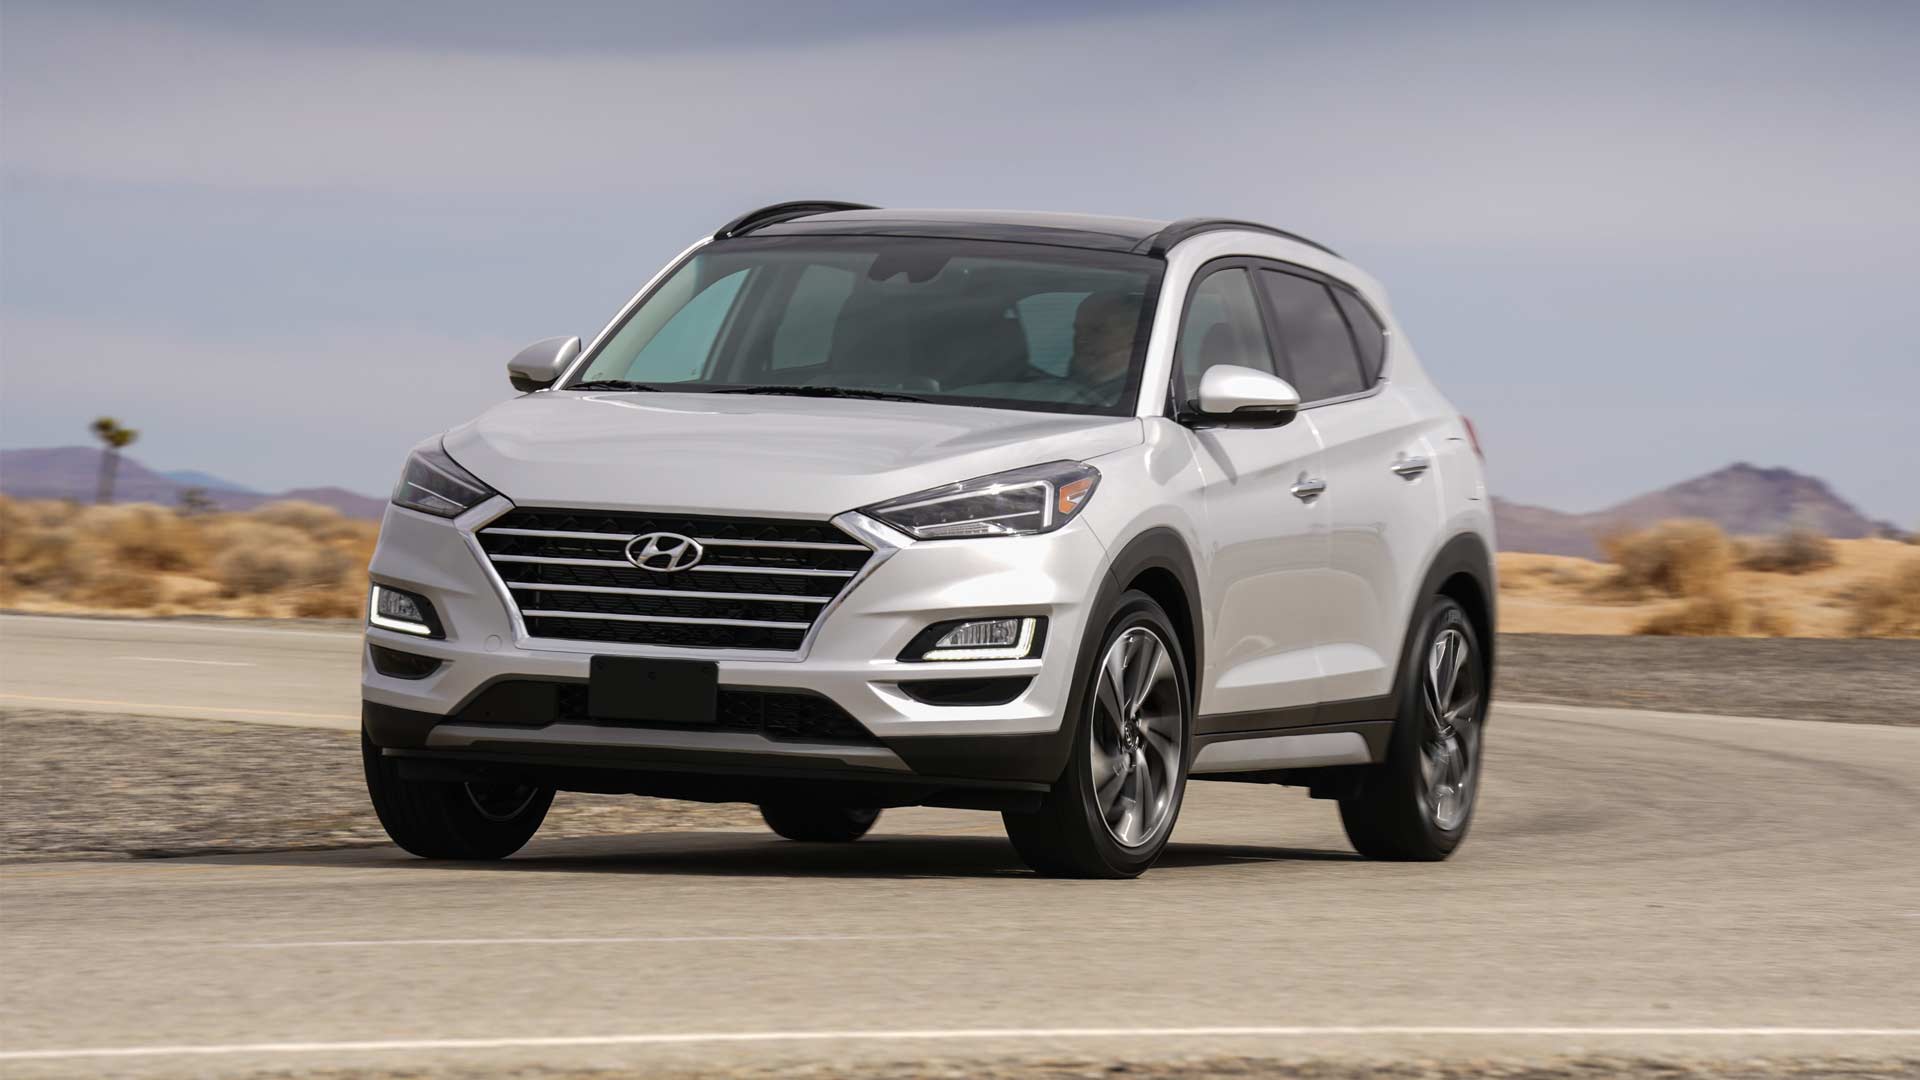 2019 Hyundai Tucson gets refreshed exterior and more